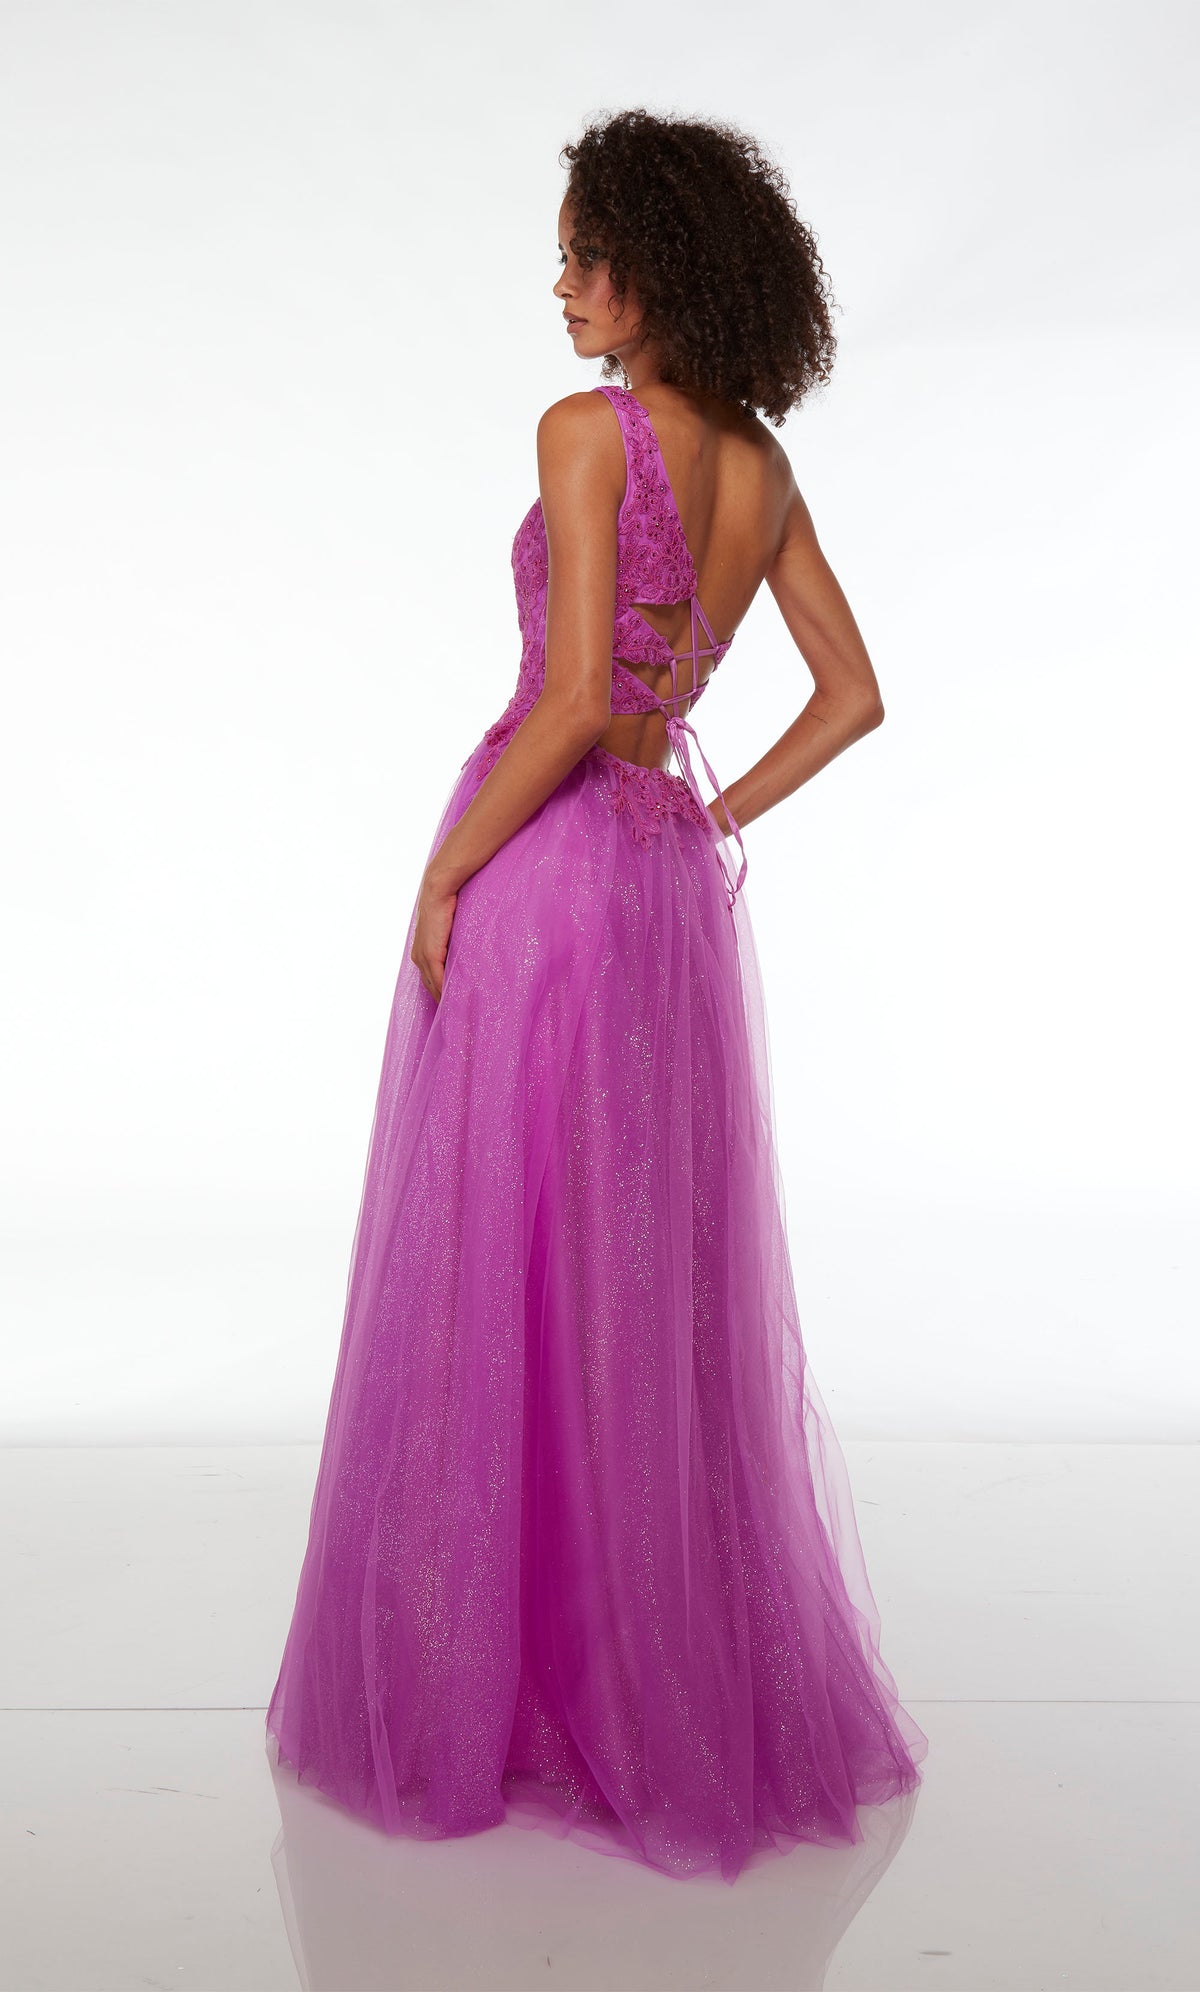 Neon purple colored one-shoulder prom dress: lace bodice, glitter tulle skirt, high slit, and lace-up back for the perfect fit and an stylish, elegant look.